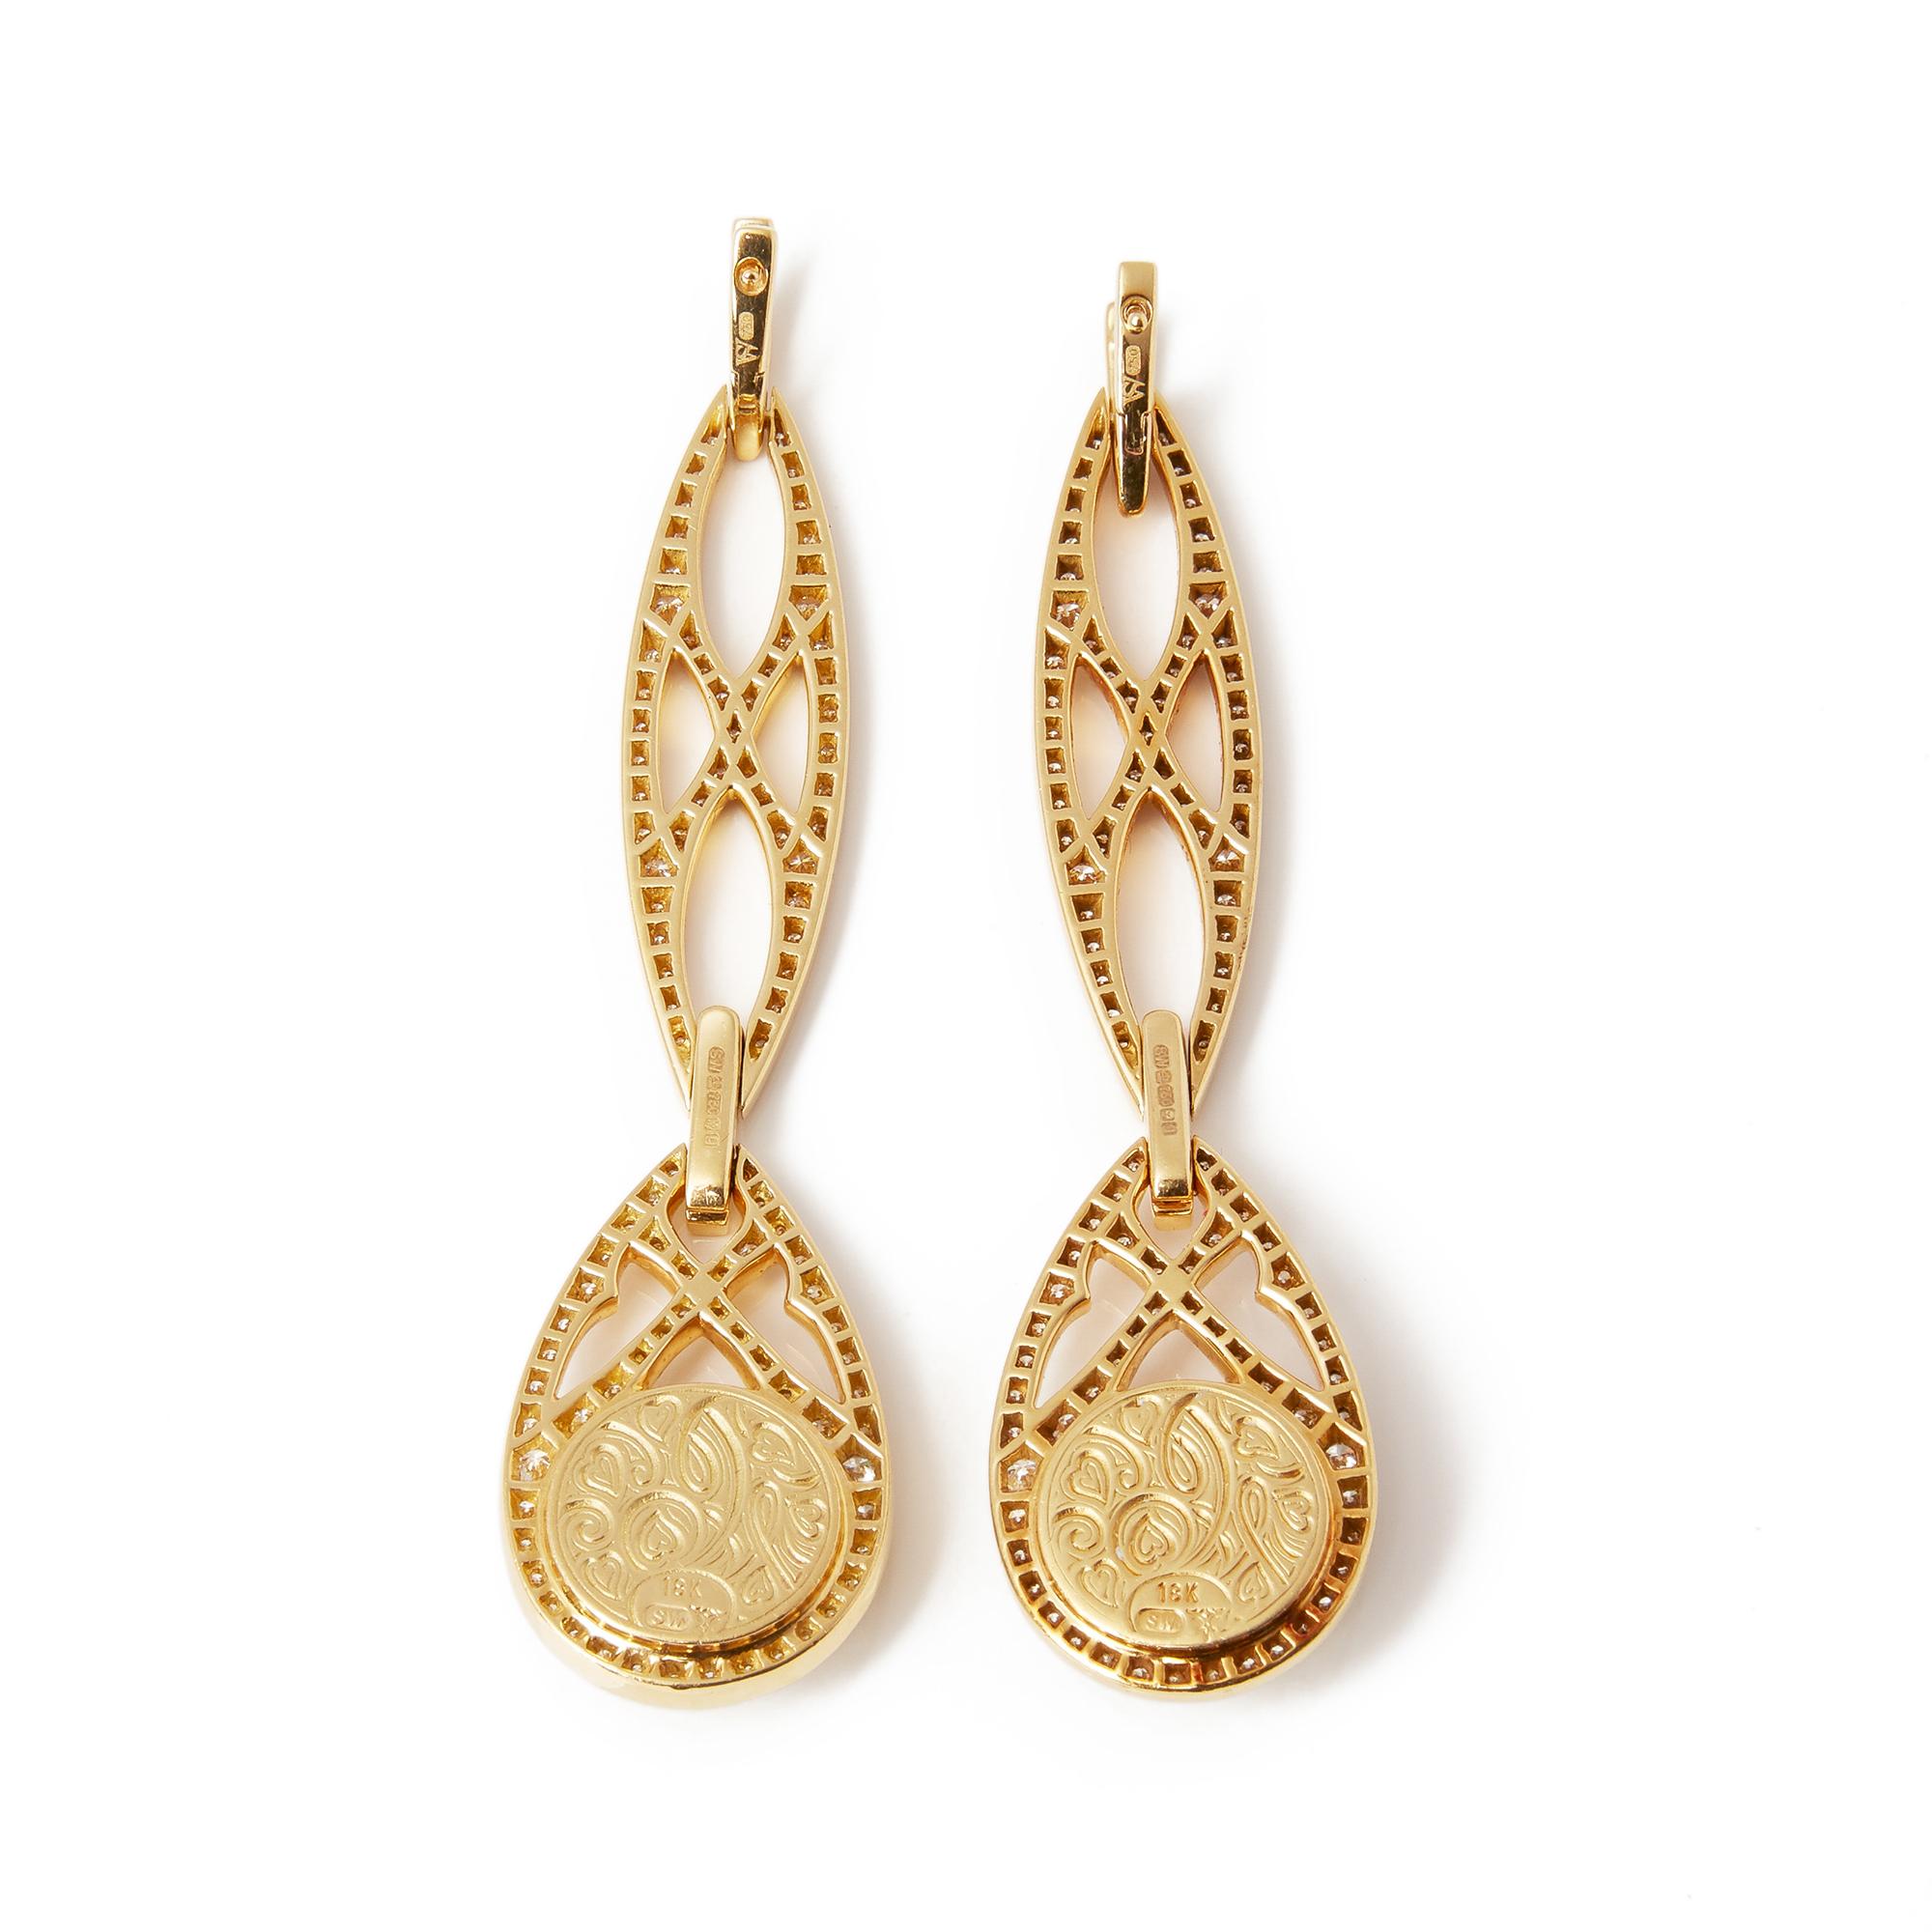 These earrings by Stephen Webster are from his Love Haze collection and feature two opalescent quartz Crystal Haze stones accentuated by pave set white diamonds. Set in yellow gold and with a post fitting and detachable element. 

Yellow Gold